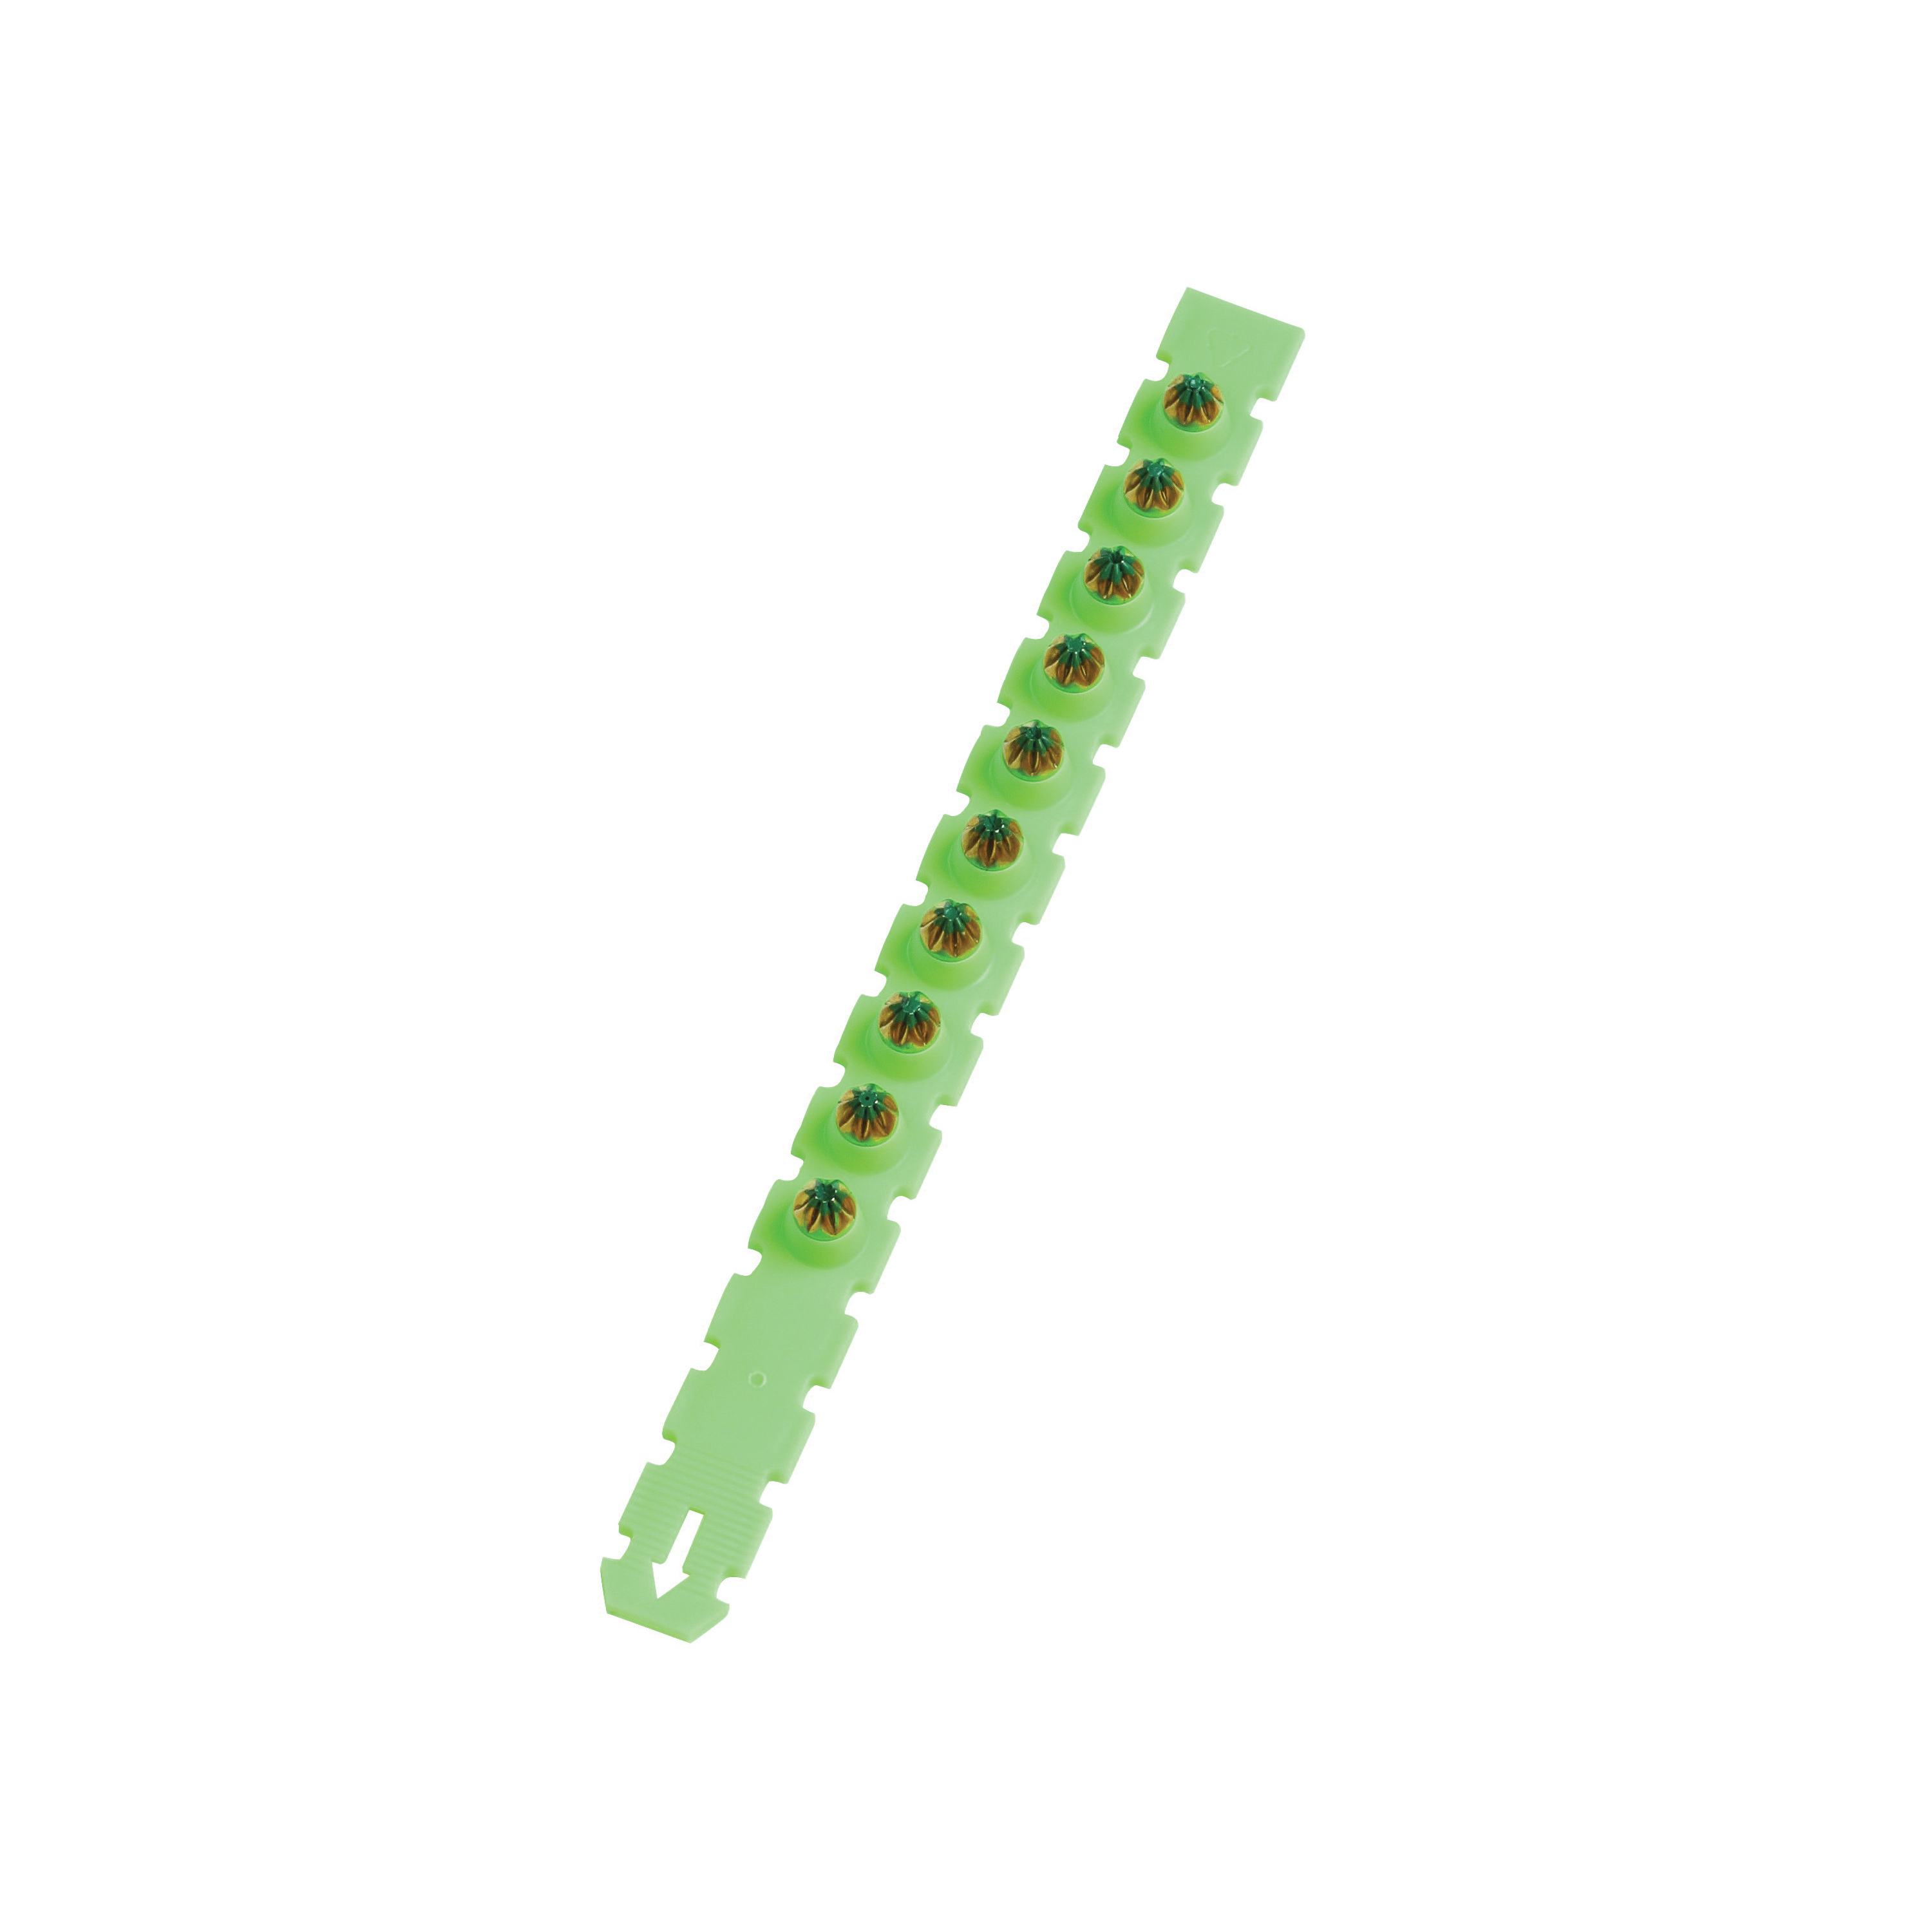 Ramset C3RS27 Powder Actuated Load Strip, Power Level: 3, Green Code, 10-Load, 0.27 in Dia, 1-1/2 in L - 1